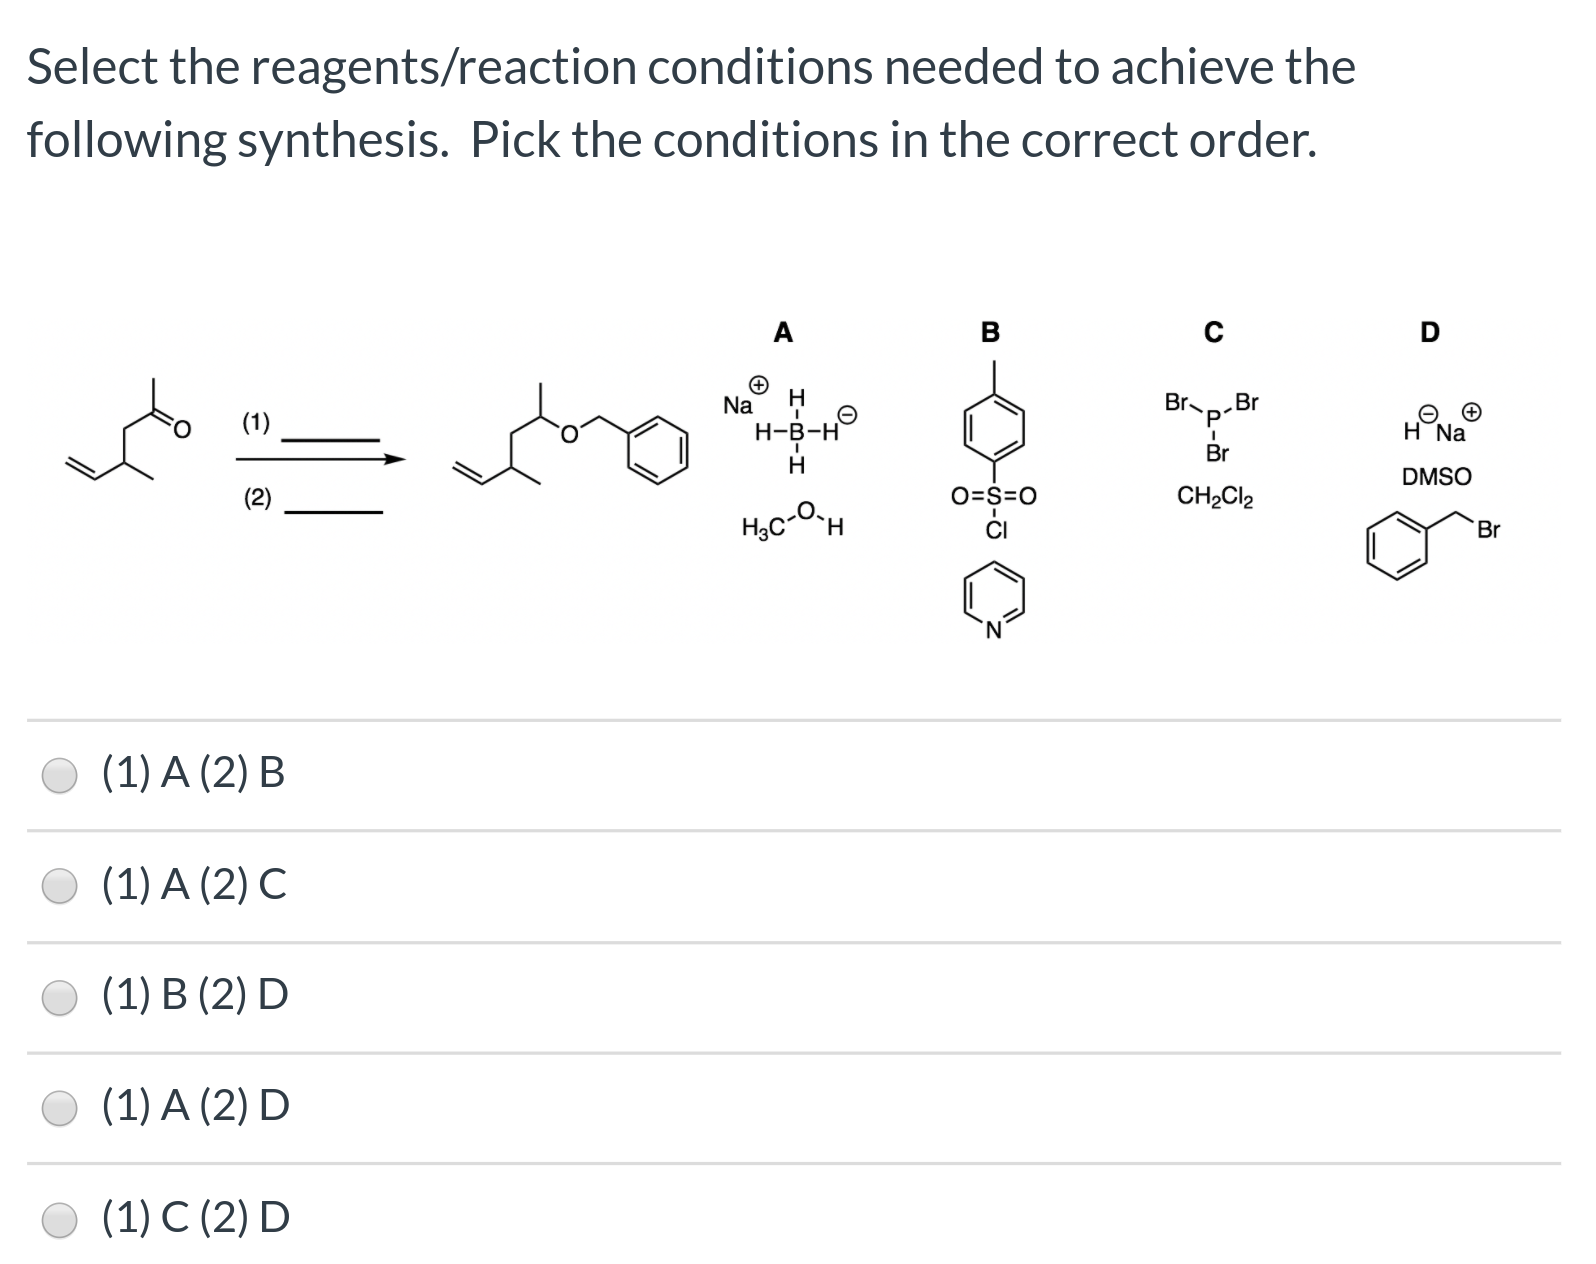 Select the reagents/reaction conditions needed to achieve the following synthesis. Pick the conditions in the correct order.